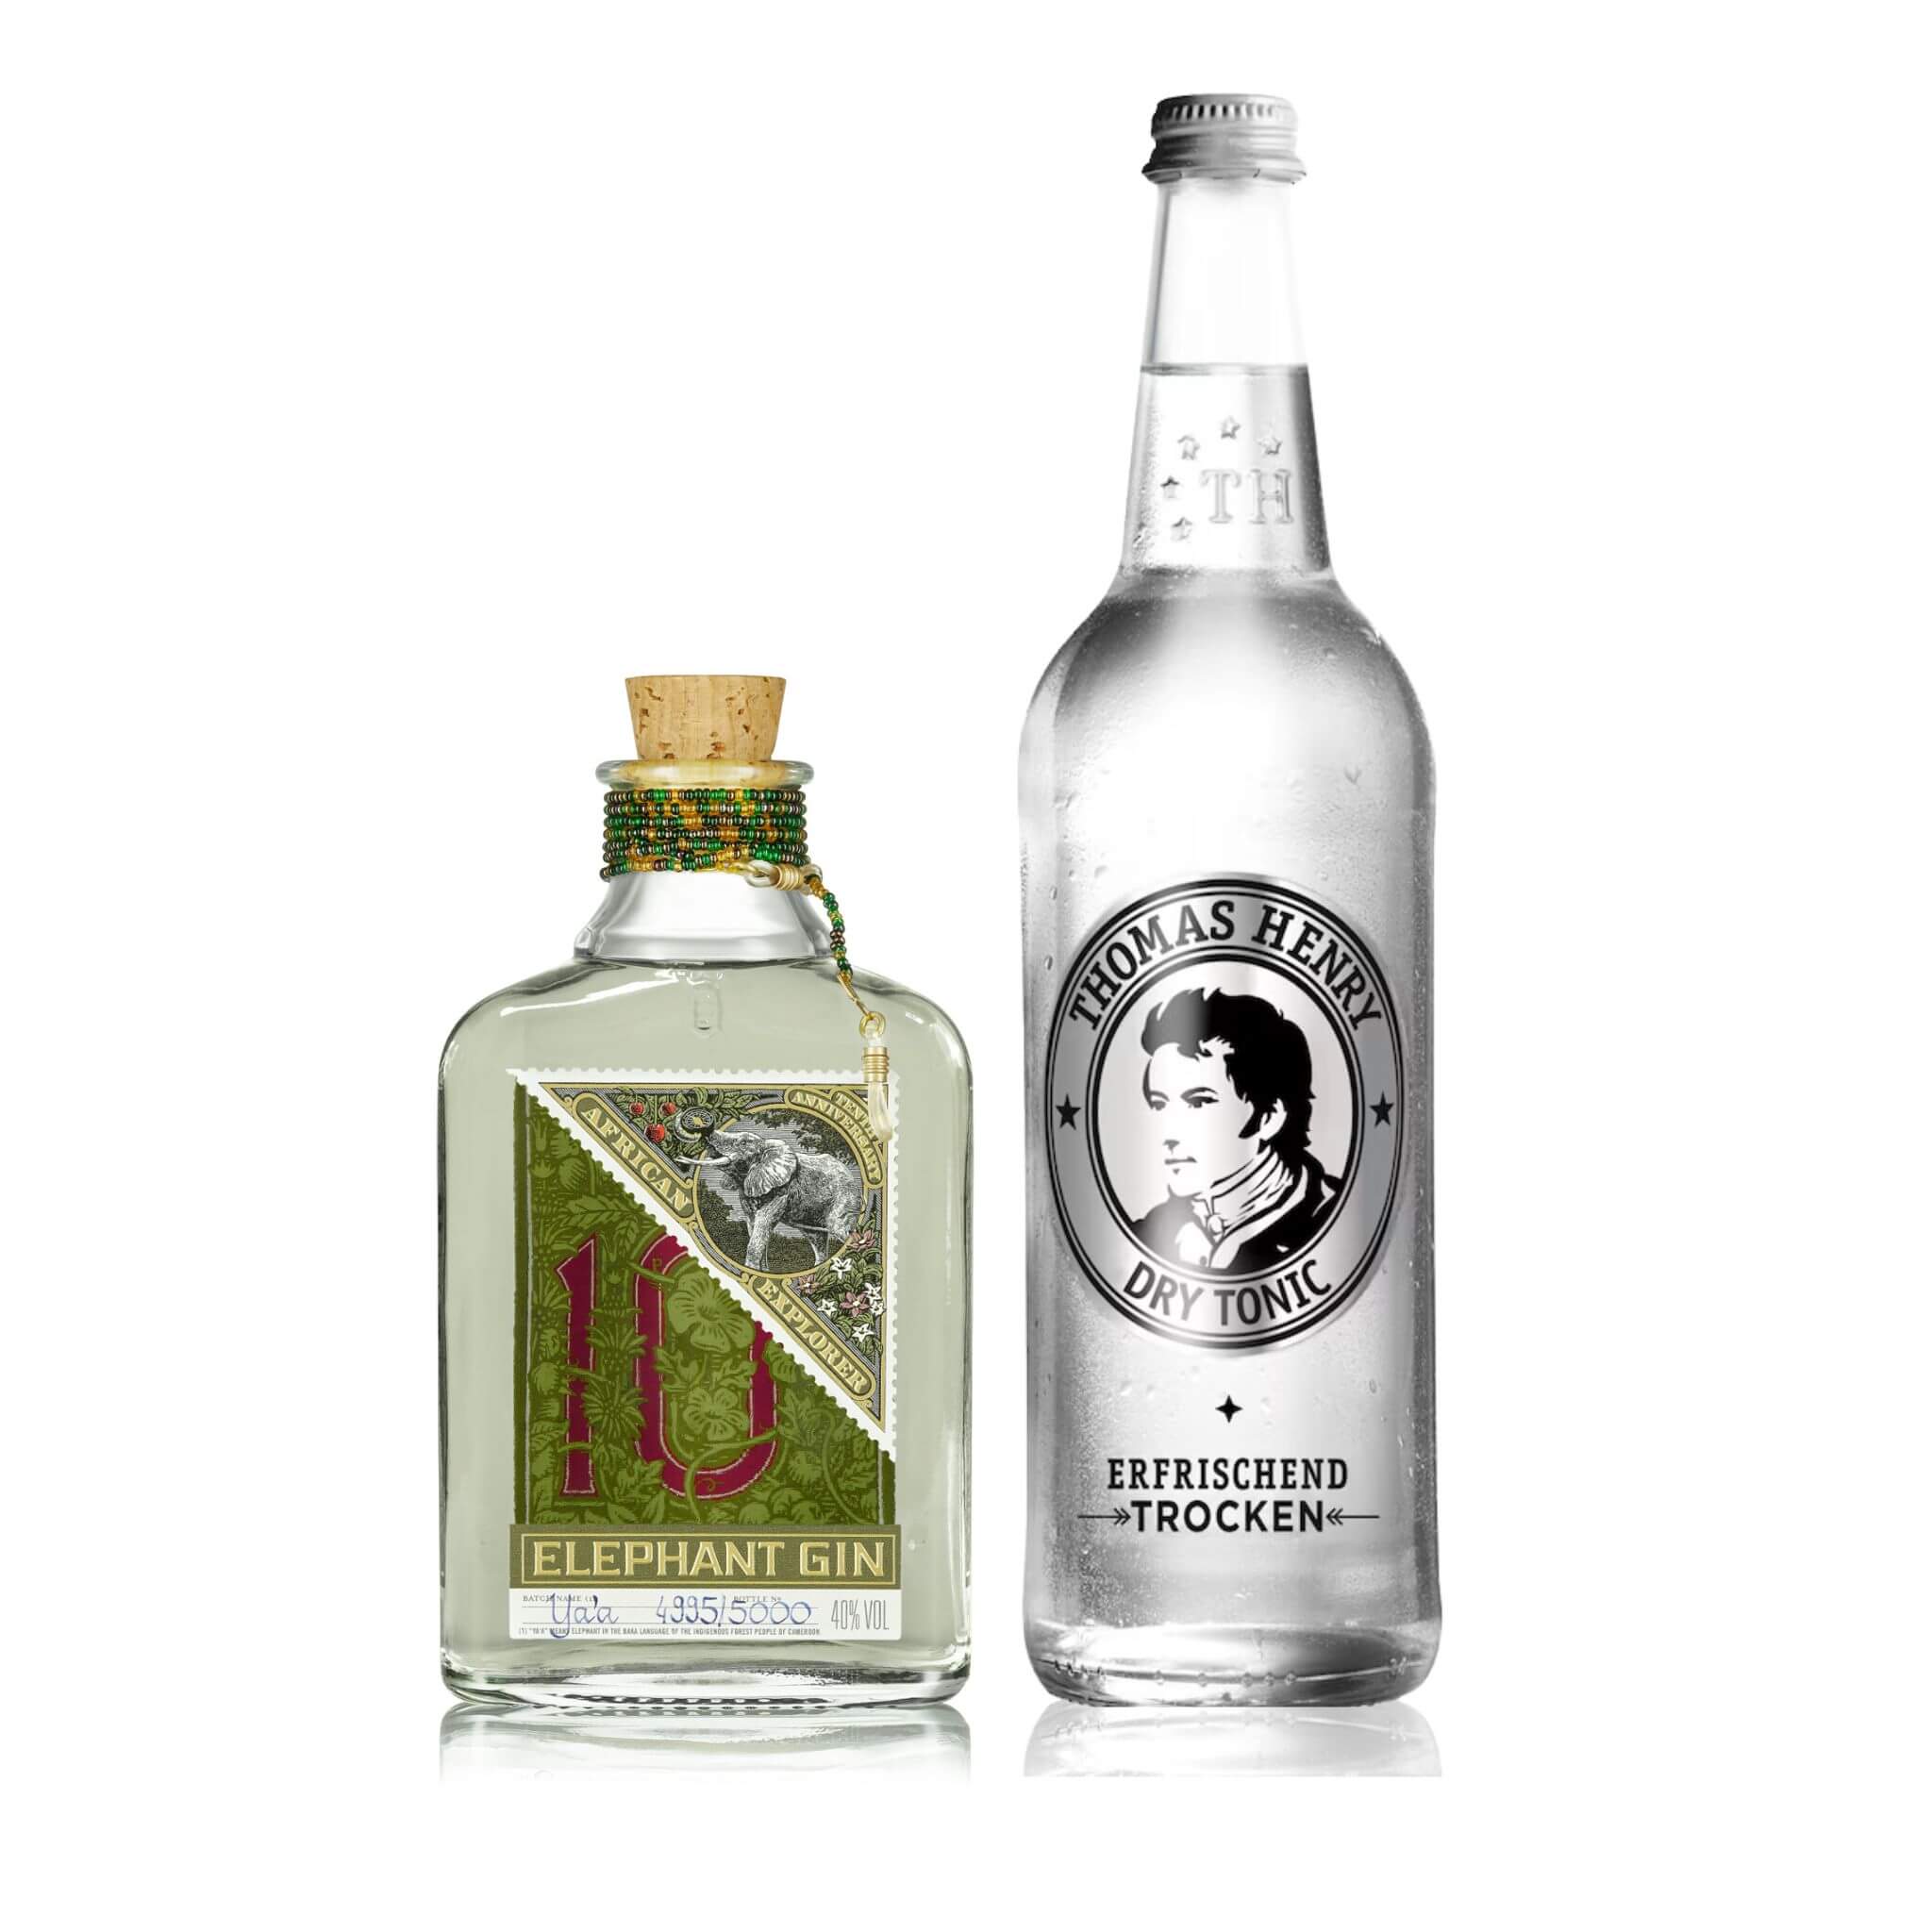 African Explorer, limitierte Edition Gin 500ml and Tonic Bundle